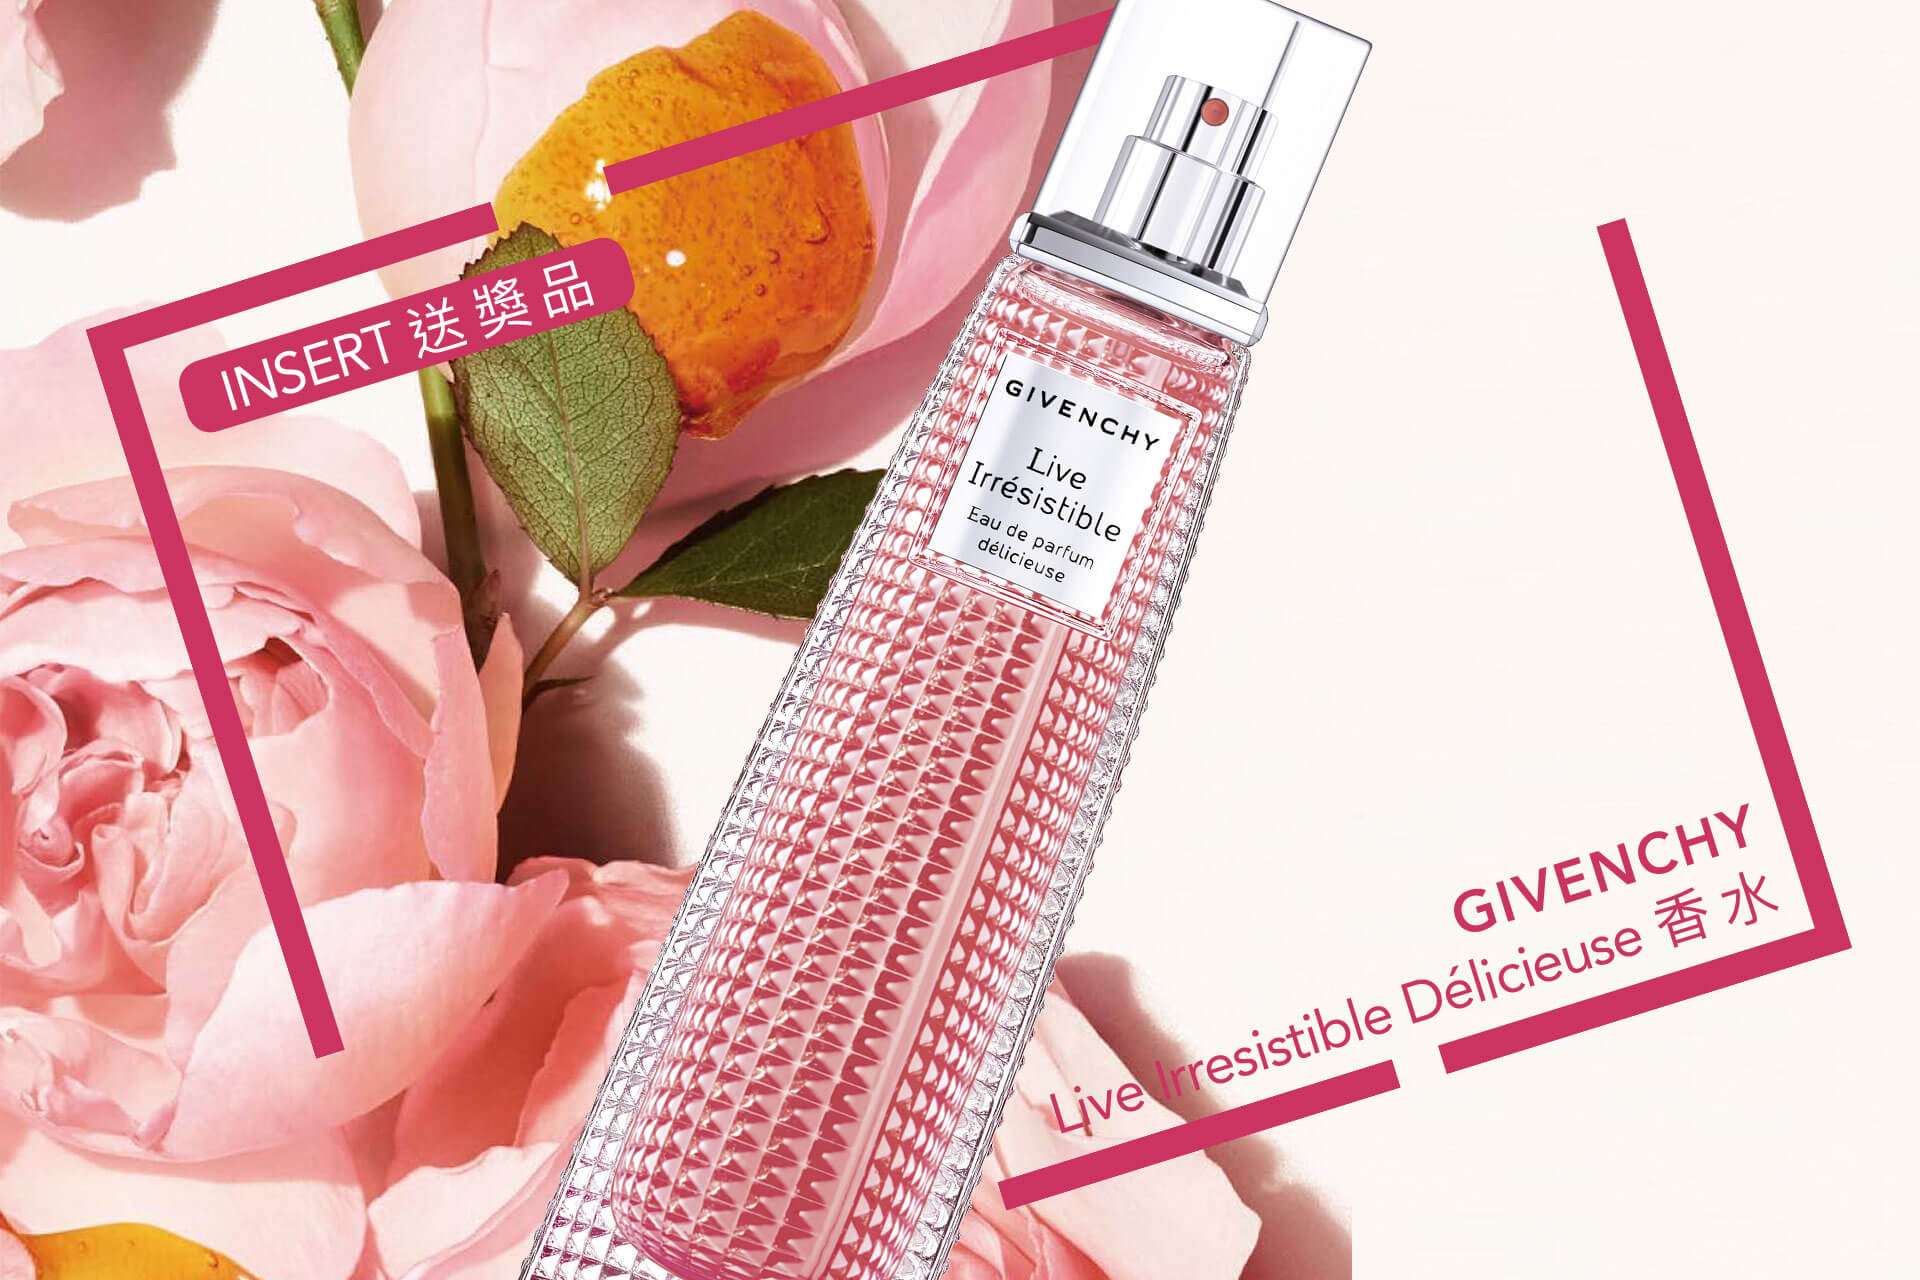 INSERT送獎品: Givenchy Live Irresistible Délicieuse香水！ | INSERT Magazine